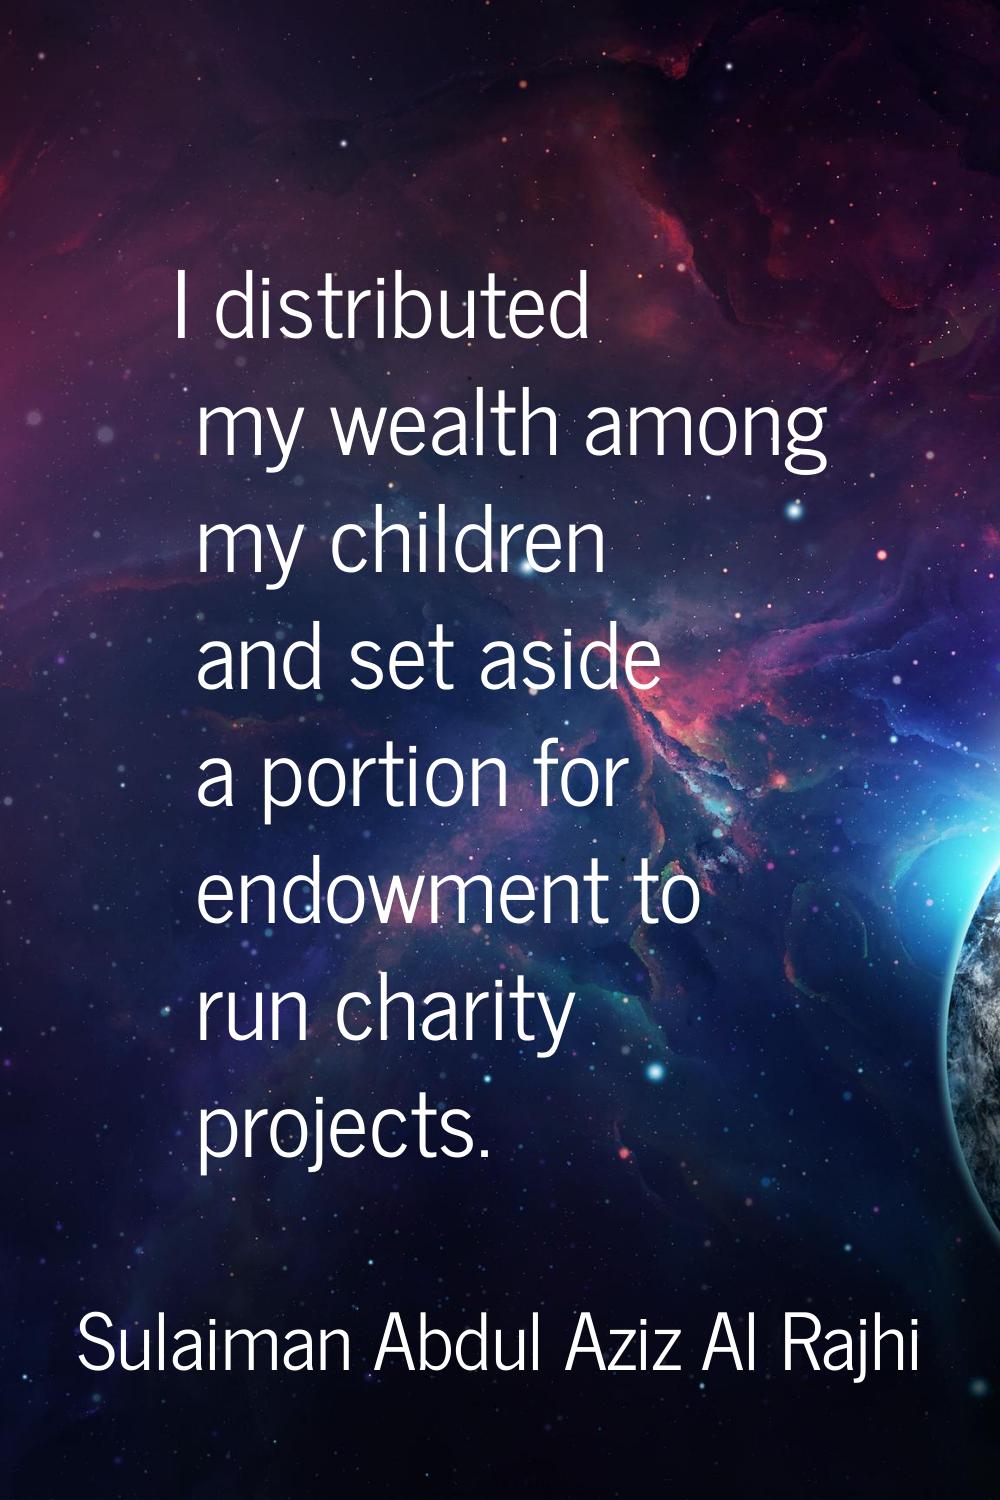 I distributed my wealth among my children and set aside a portion for endowment to run charity proj